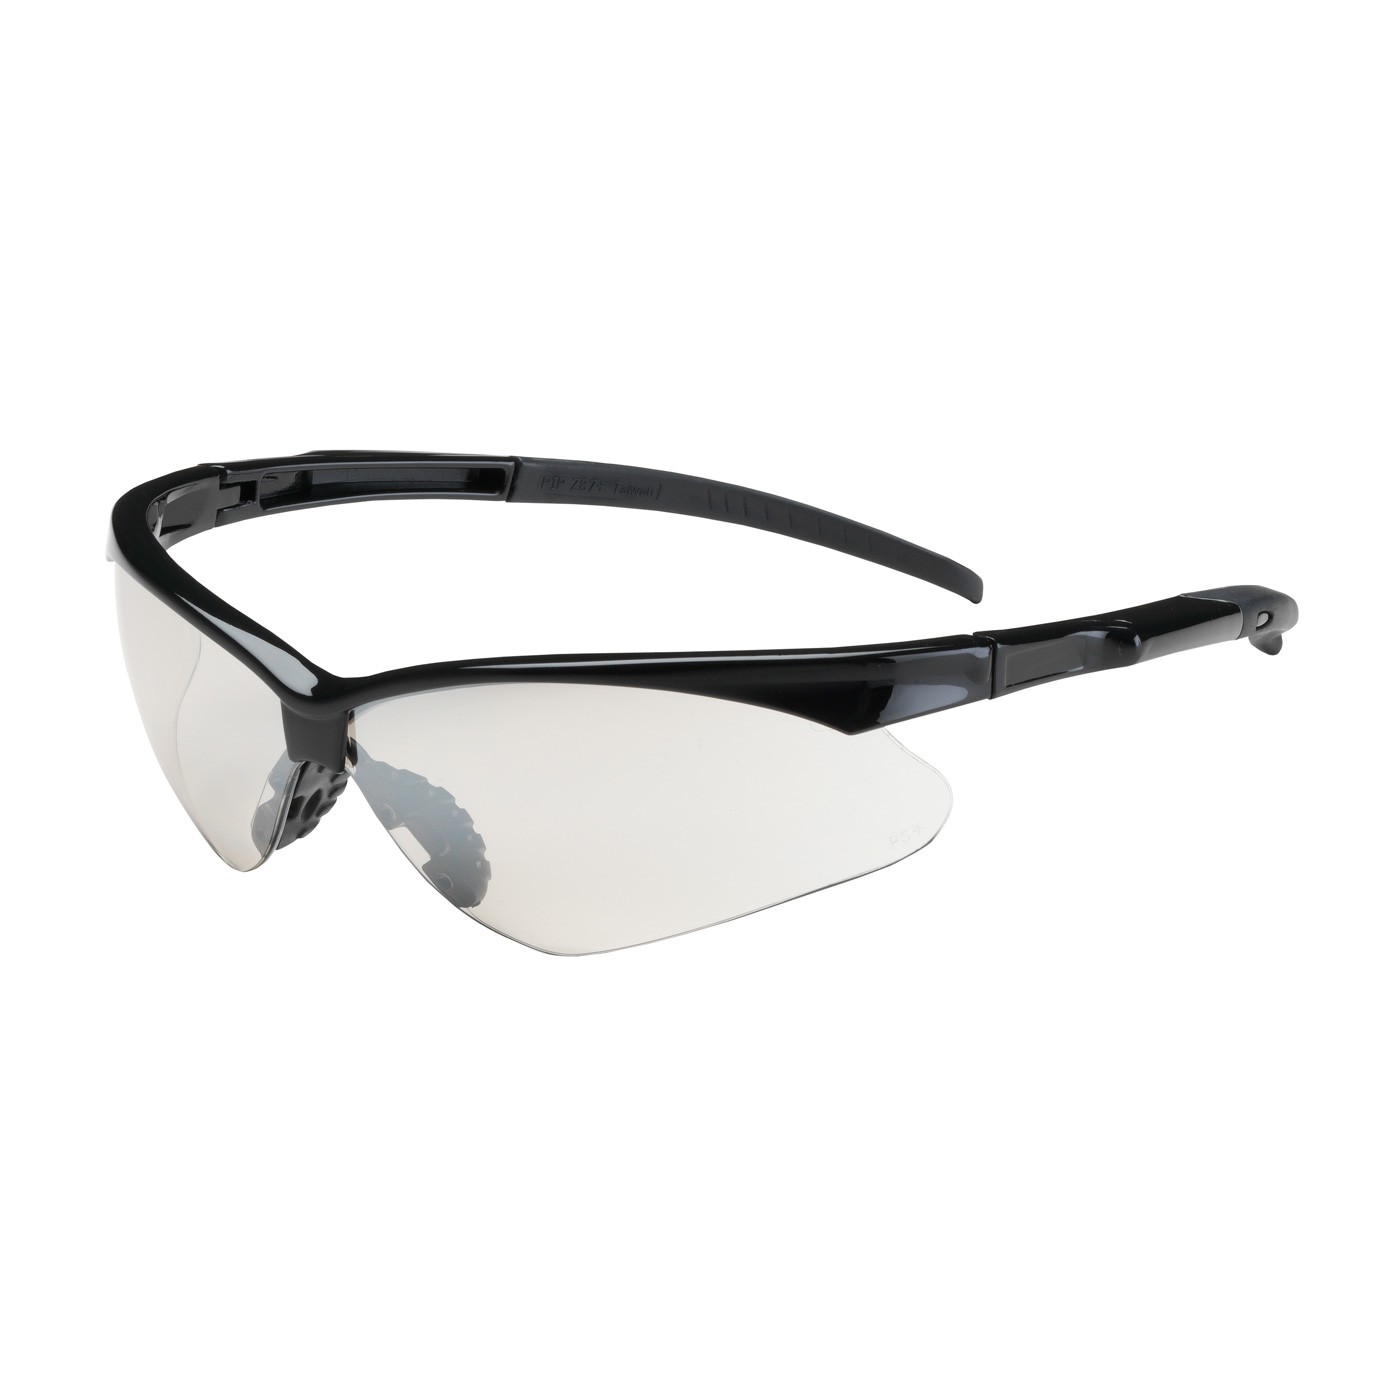 Safety Glasses Clear Anti Scratch lens, Clear temples, Soft Clear Bridge